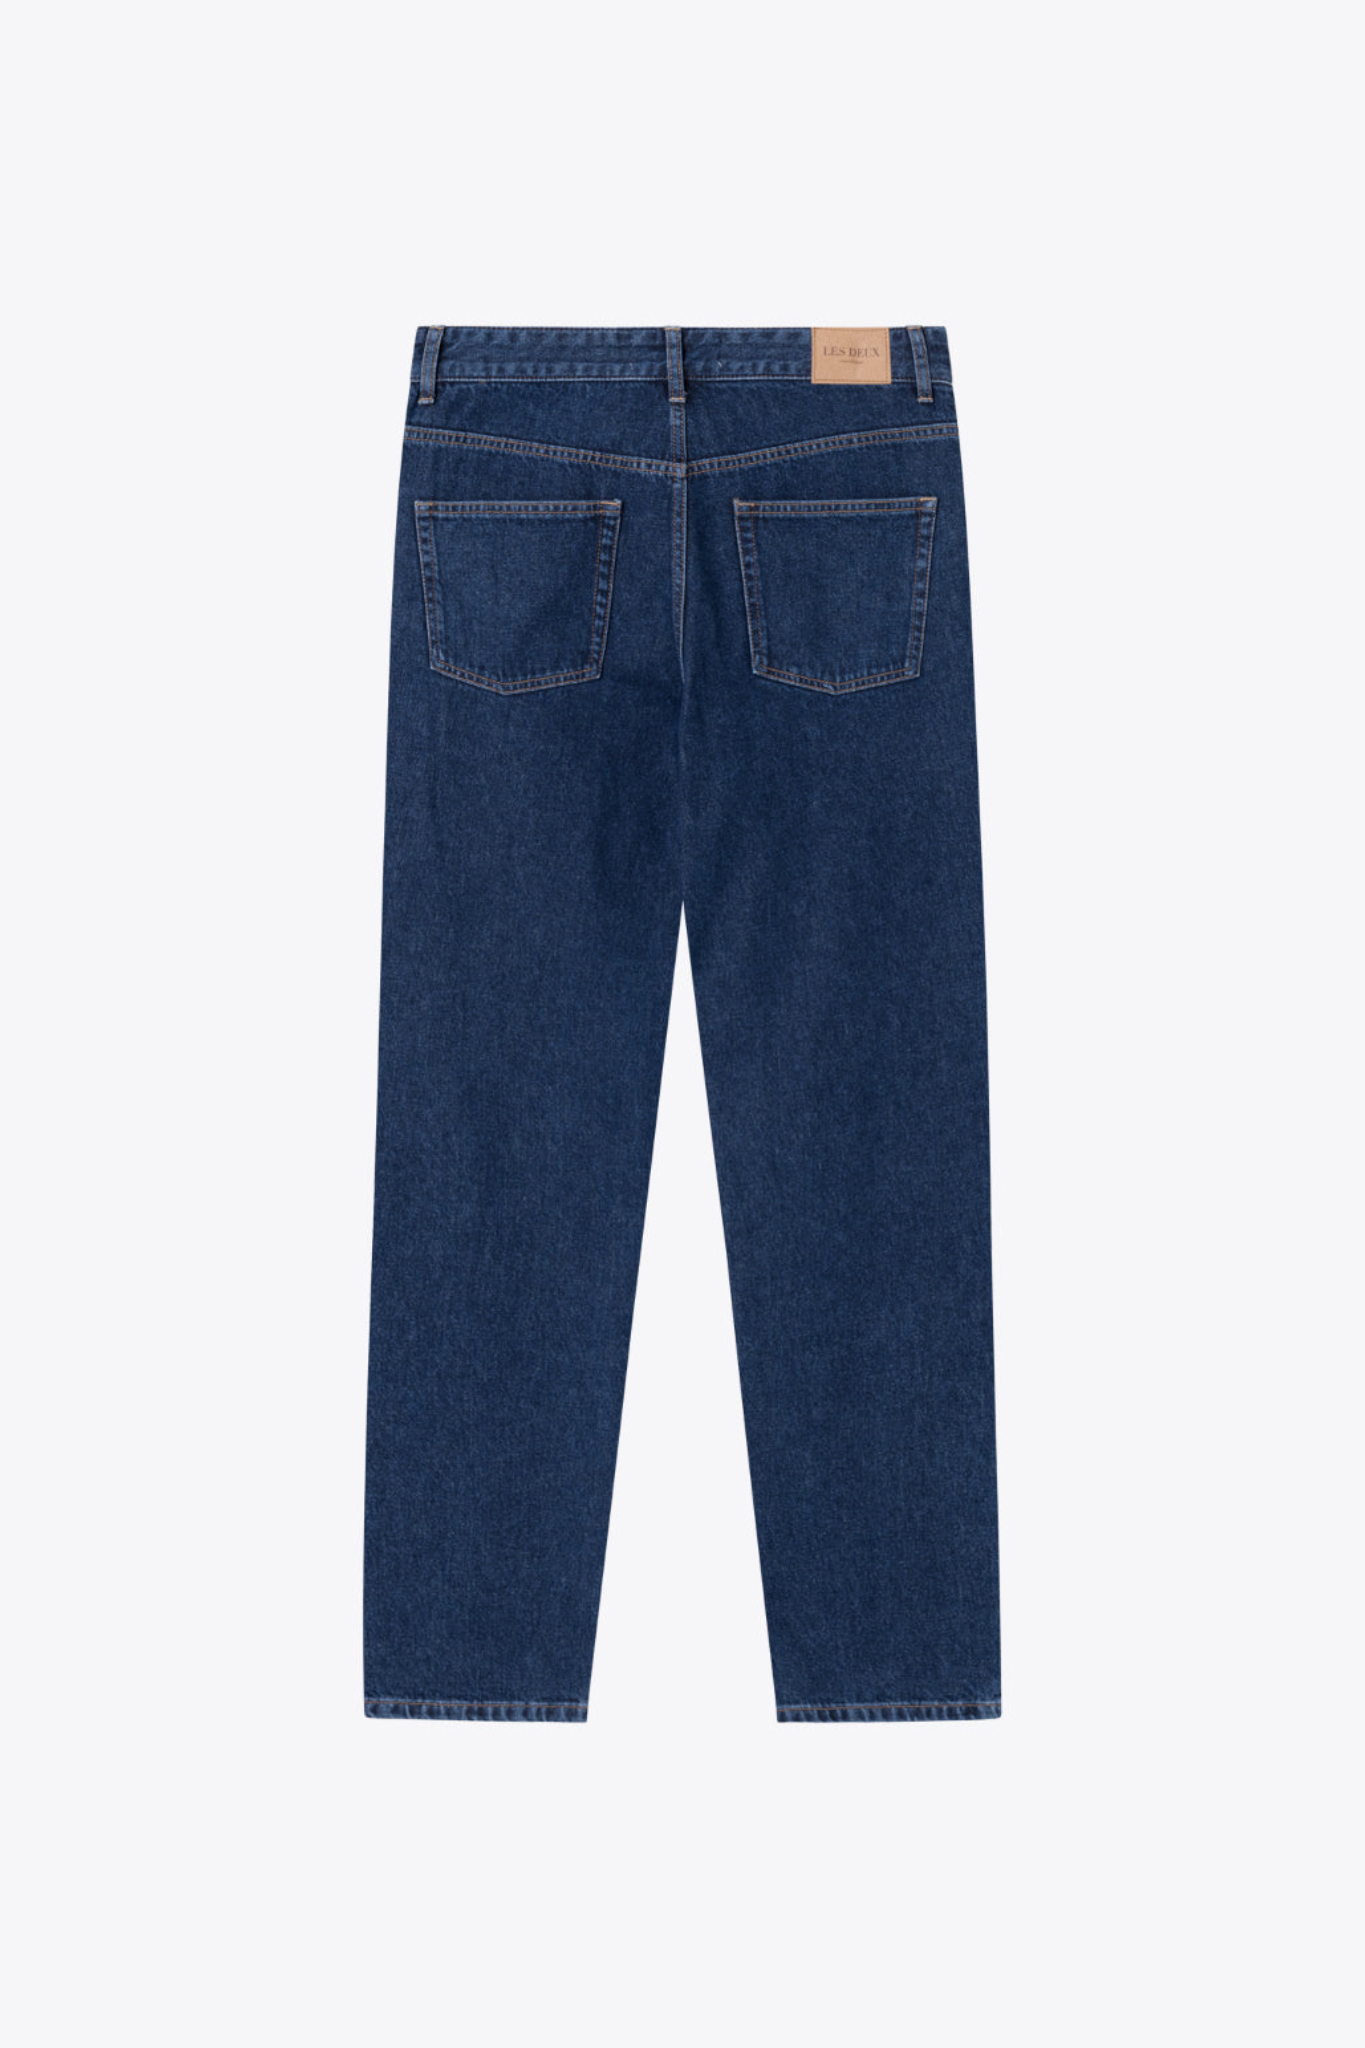 RYDER RELAXED FIT JEANS